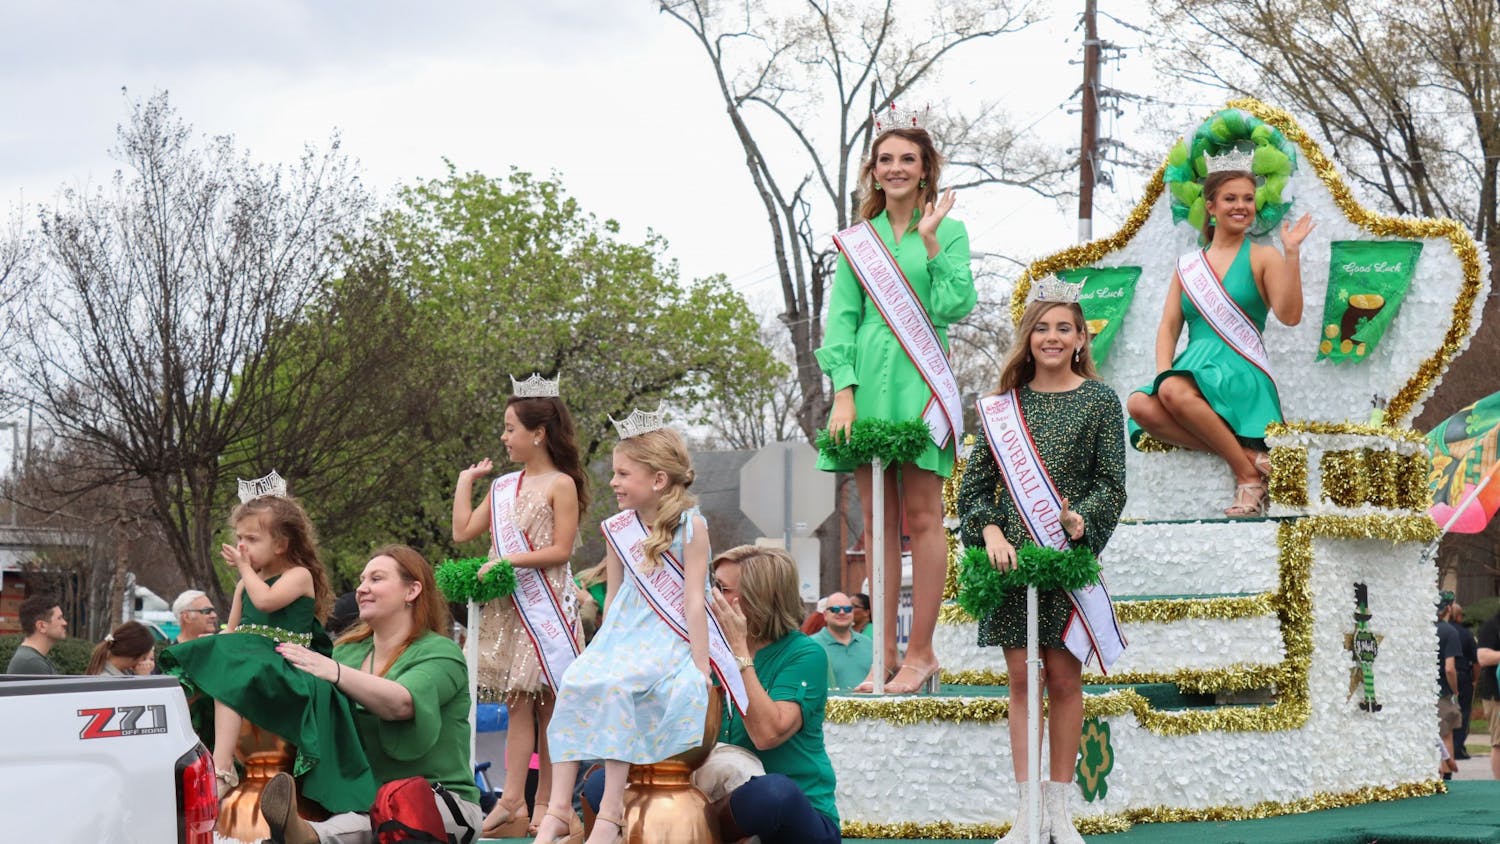 The 40th Annual St. Pats in 5 Points parade displayed a float featuring Little Miss and Teen Miss South Carolina beauty queens on March 19, 2022. 